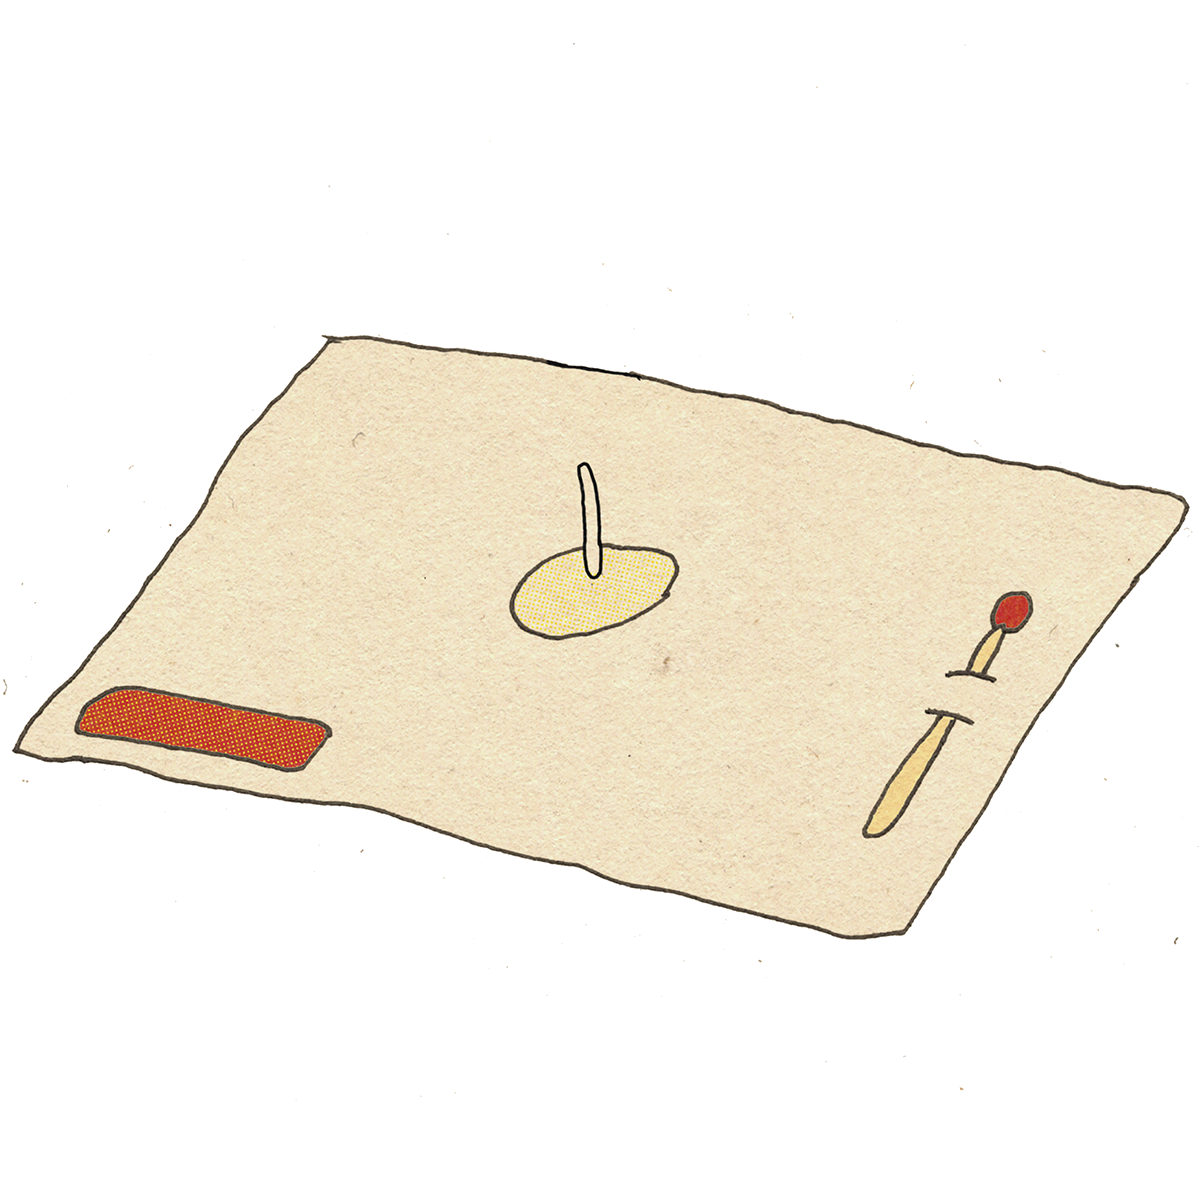 Illustration of a Wish Card.